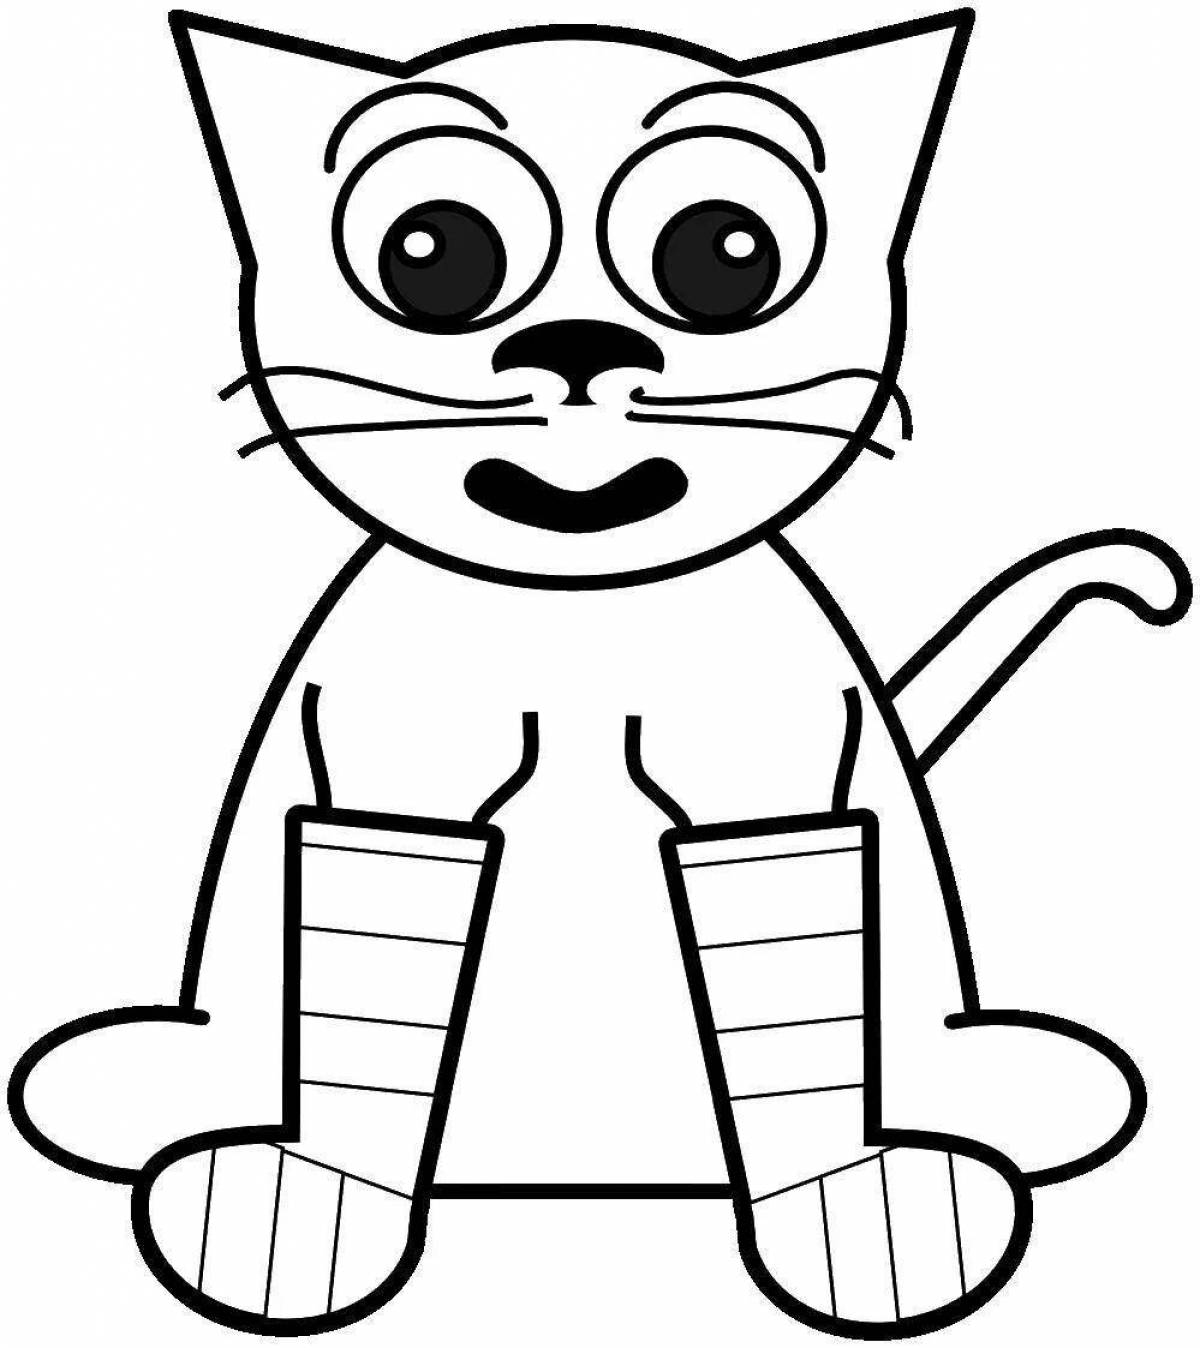 Fluffy kitten coloring page